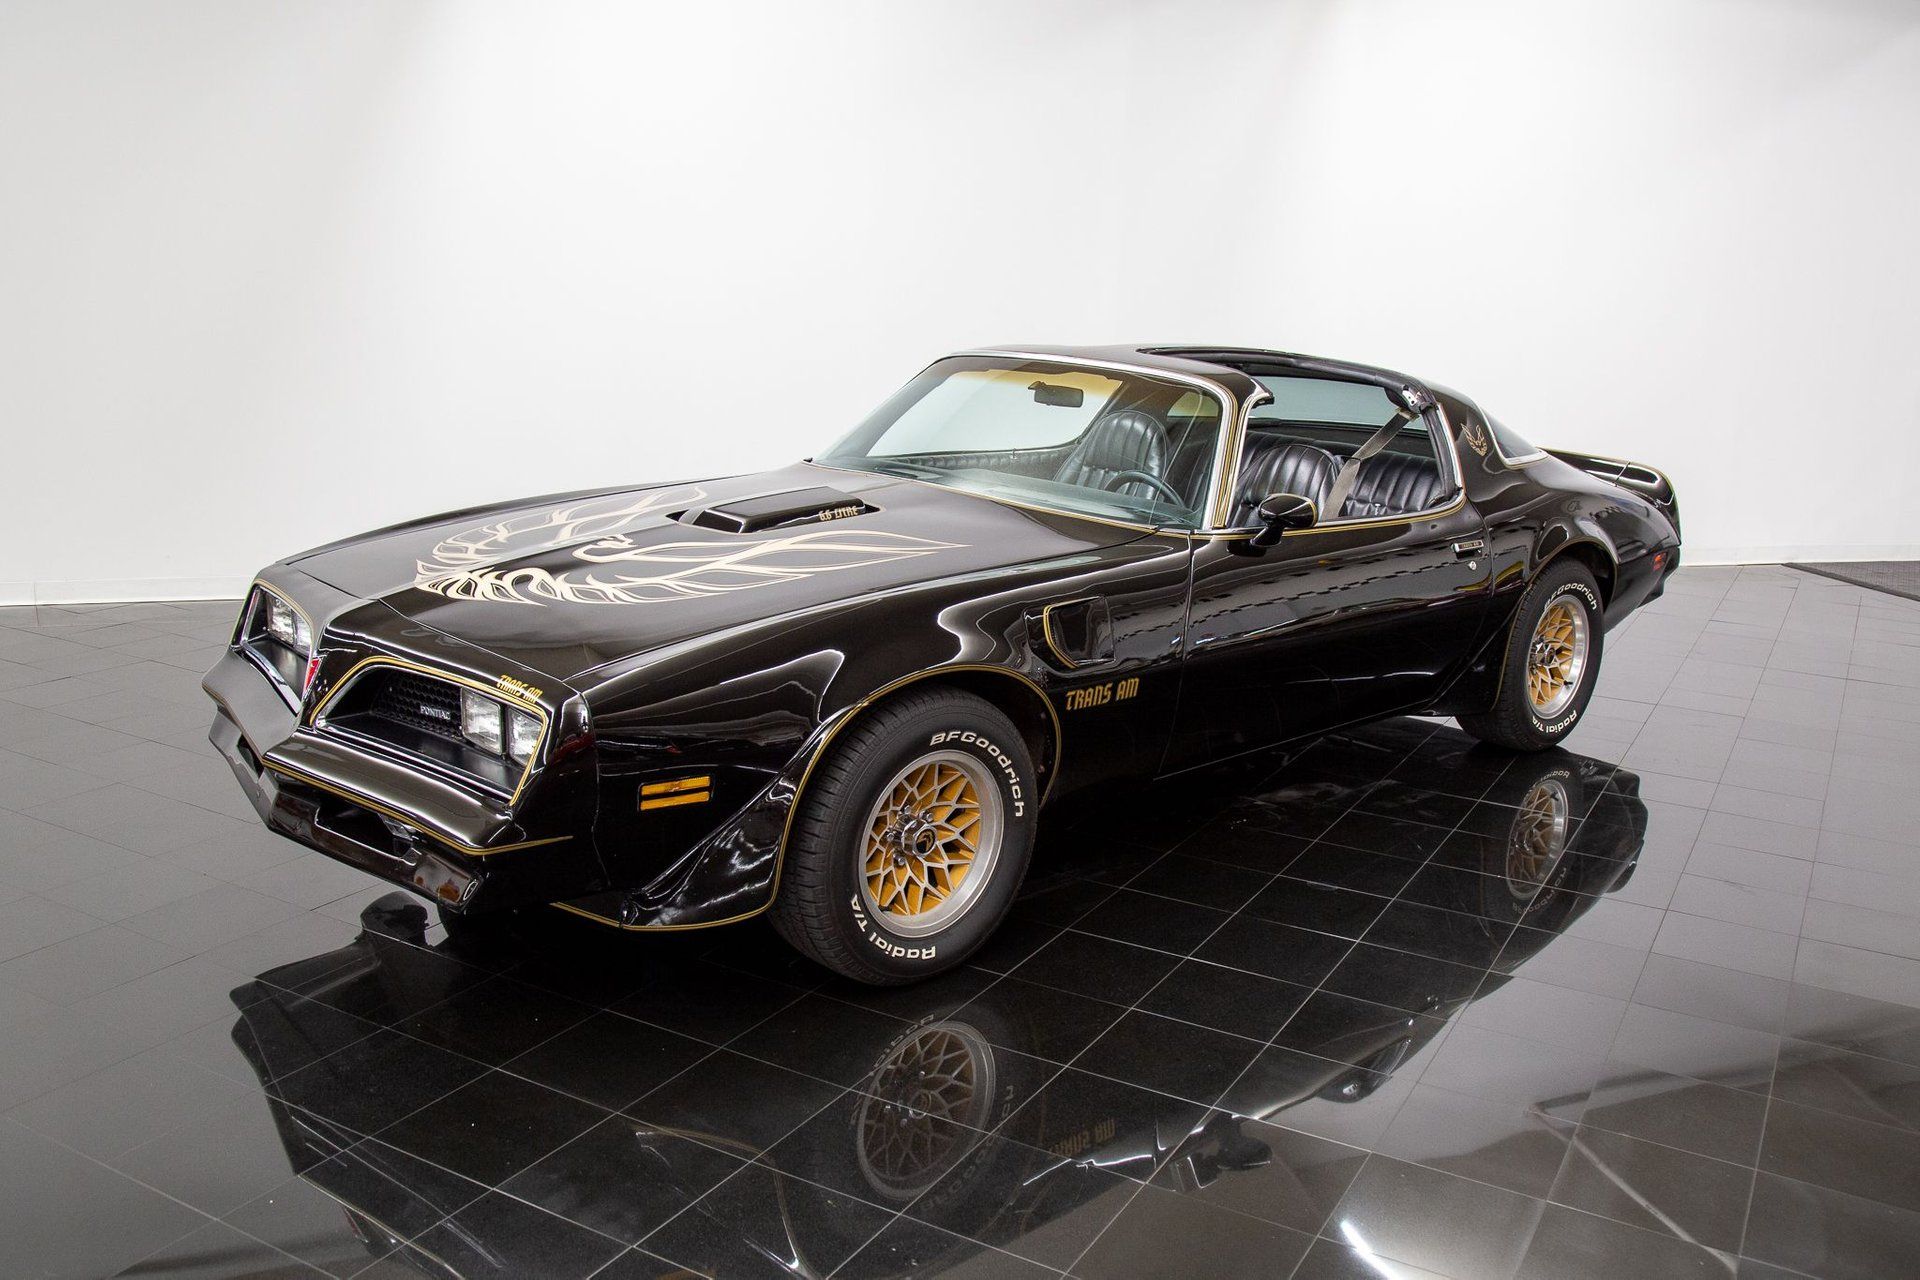 the Pontiac Trans AM sold like crazy after the Smokey and the Bandit Debute